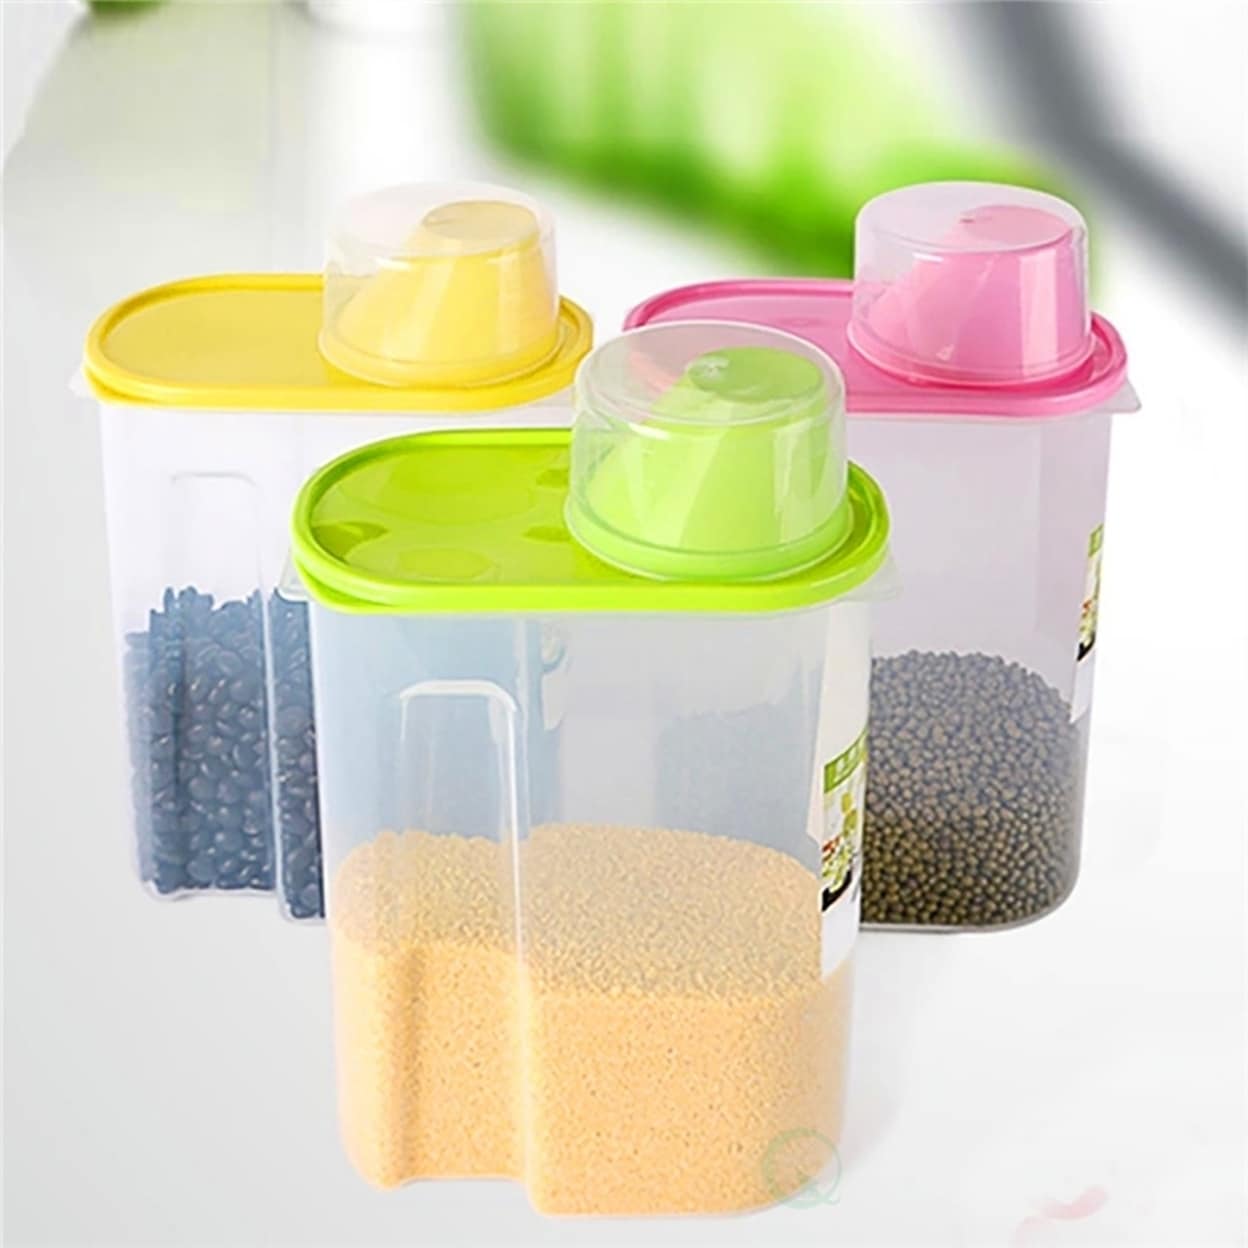 Shop Black Friday Deals On Bpa Free Plastic Food Saver Kitchen Food Cereal Storage Containers With Graduated Cap Overstock 31792388